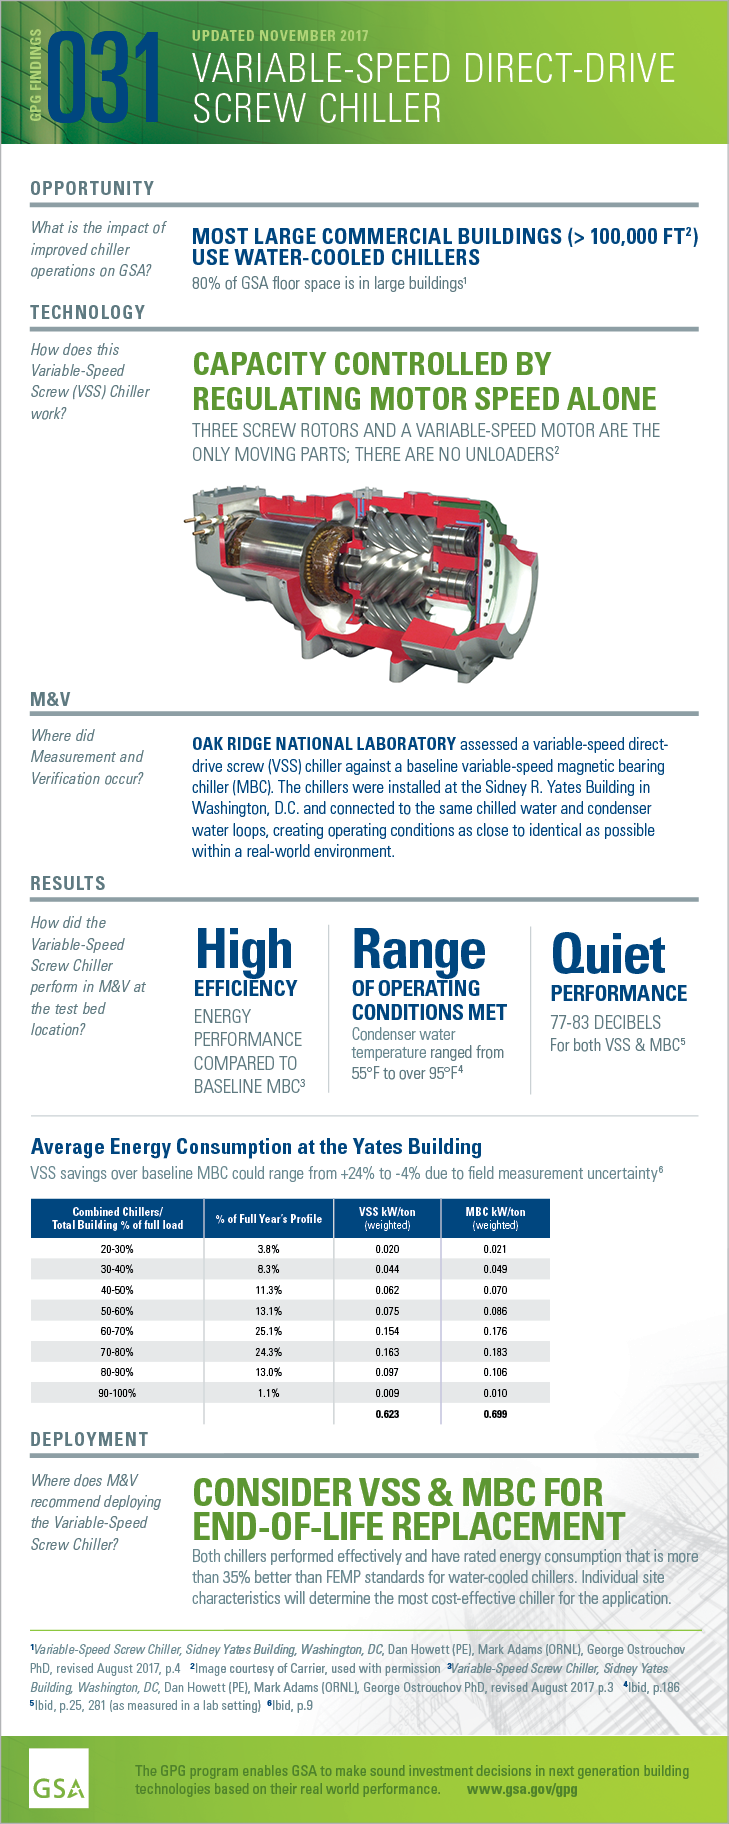 Download the PDF of the full-size infographic for GPG031 Variable-Speed Screw Chiller.